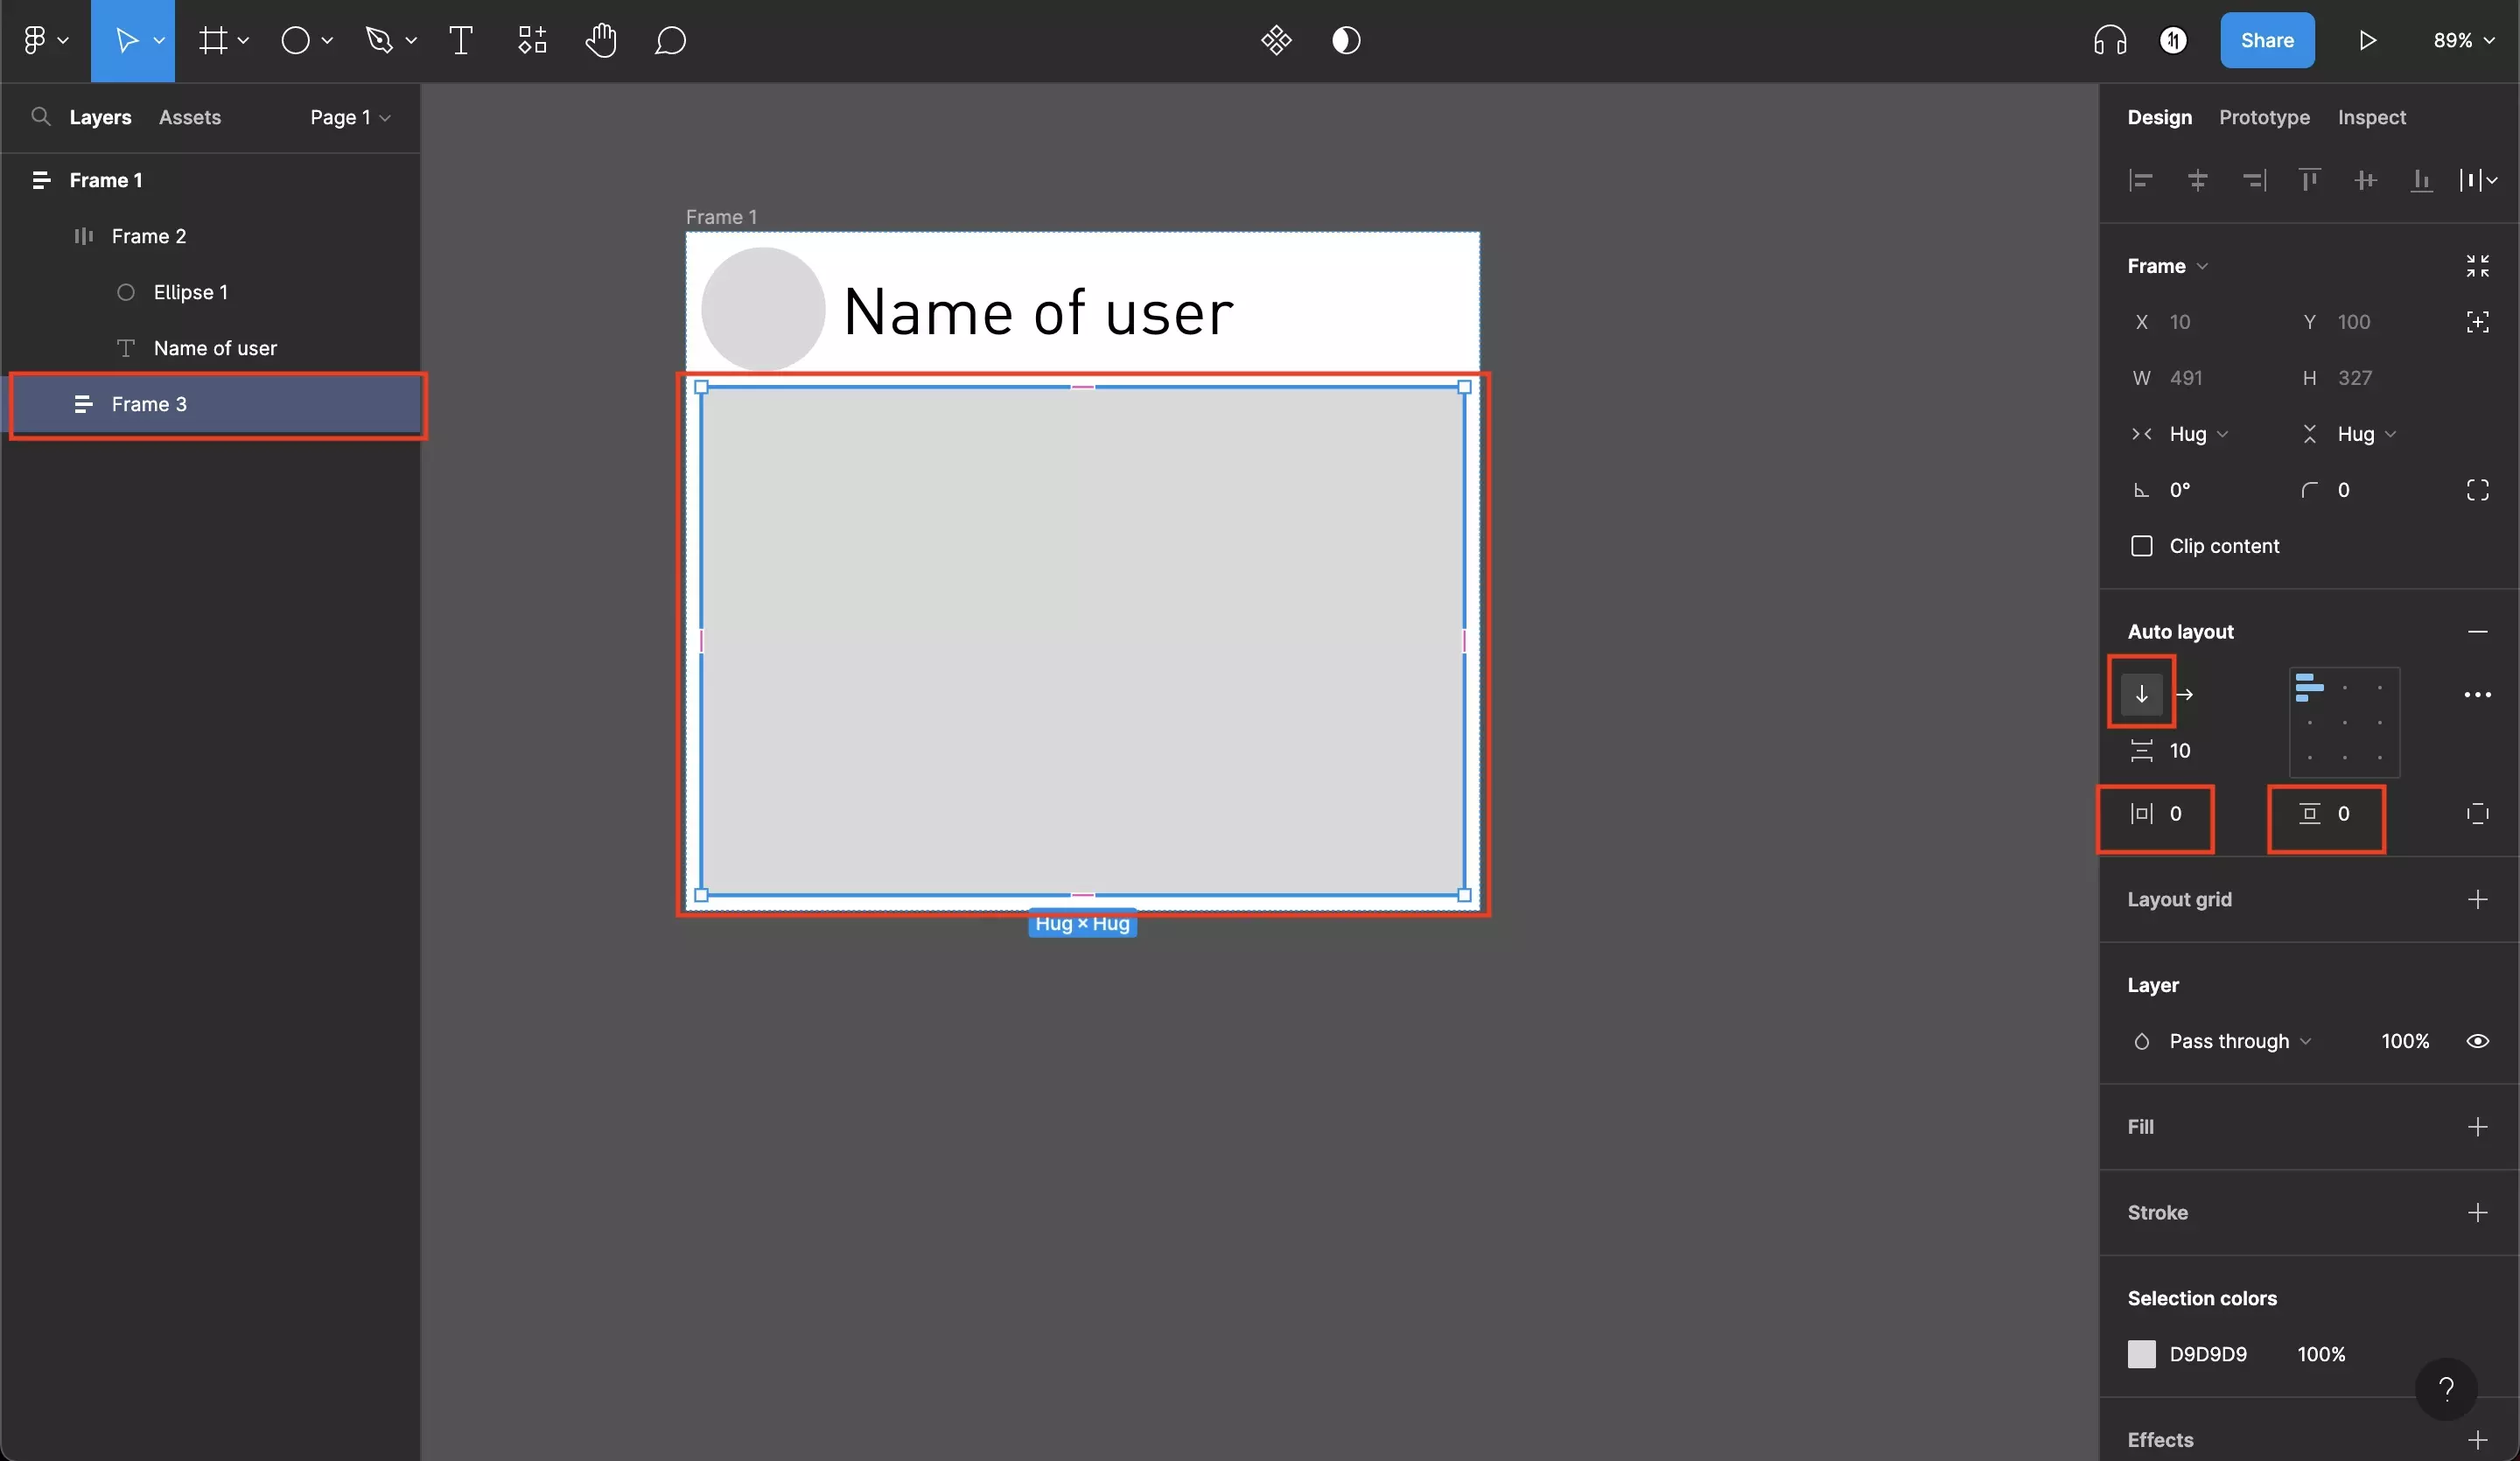 A screenshot of Figma showing the bottom section converted to auto layout along with highlights on the changes in parameters, which are described below.